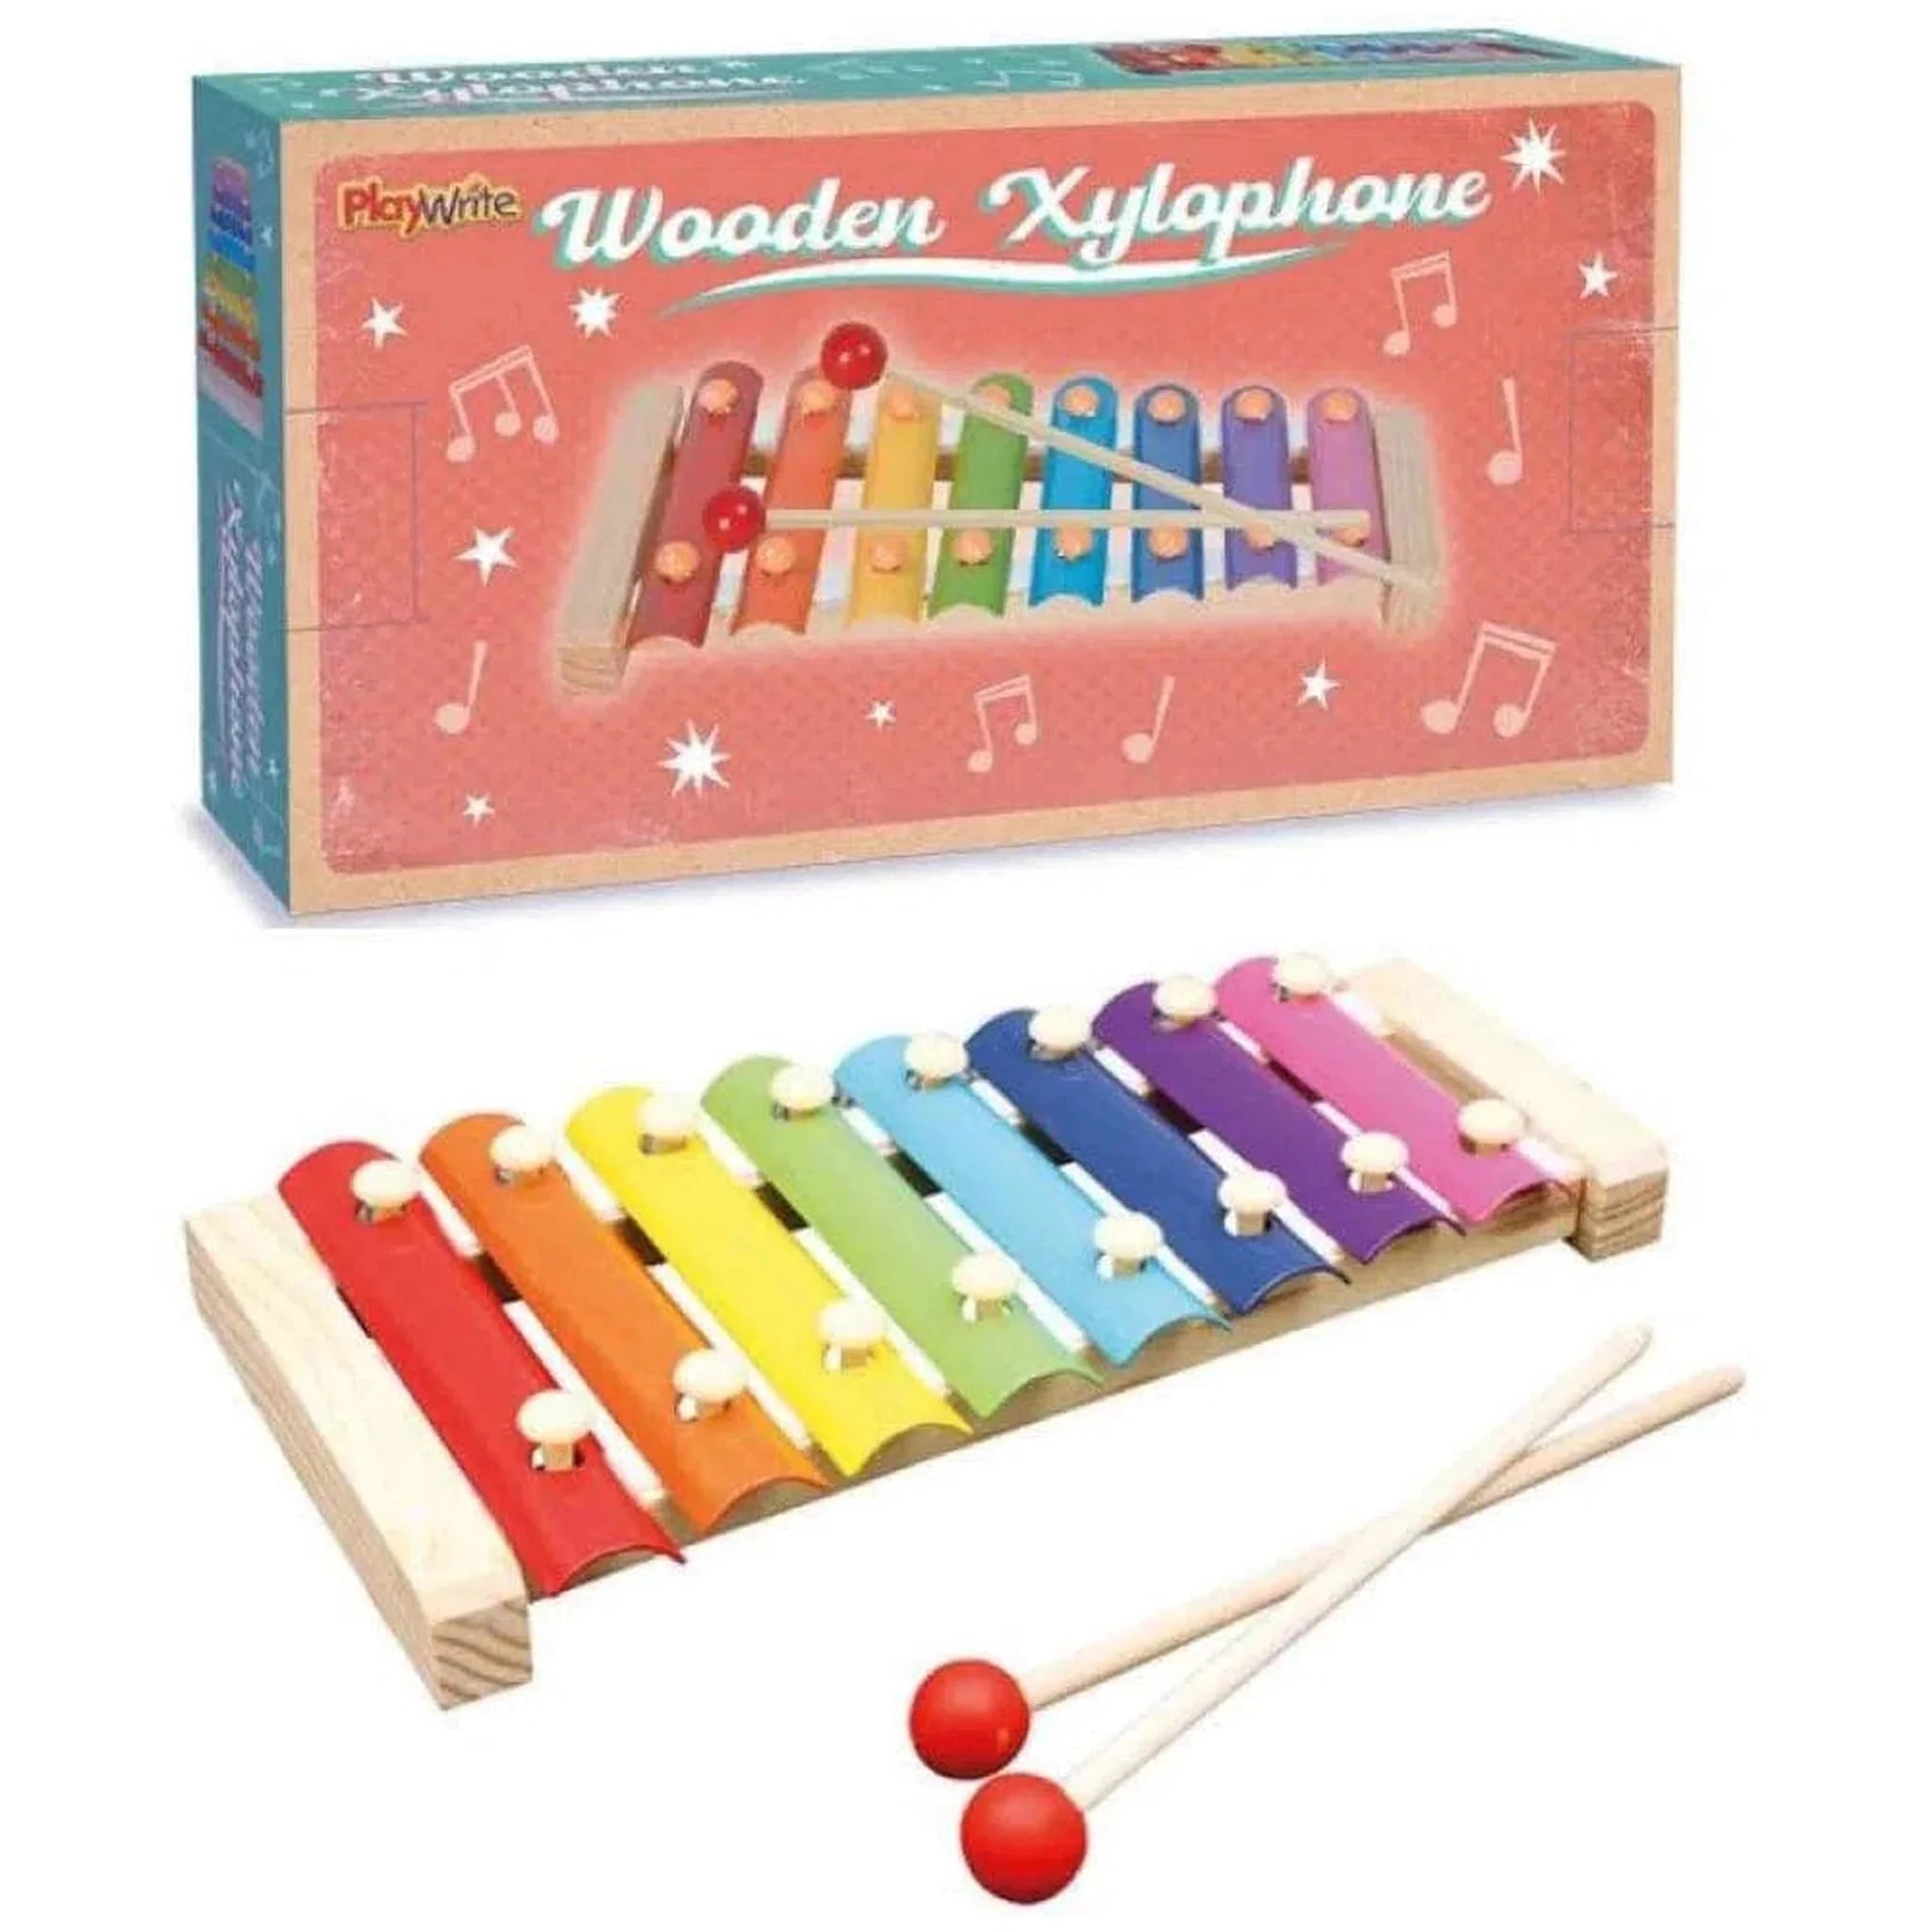 Wooden Xylophone - Kids Party Craft